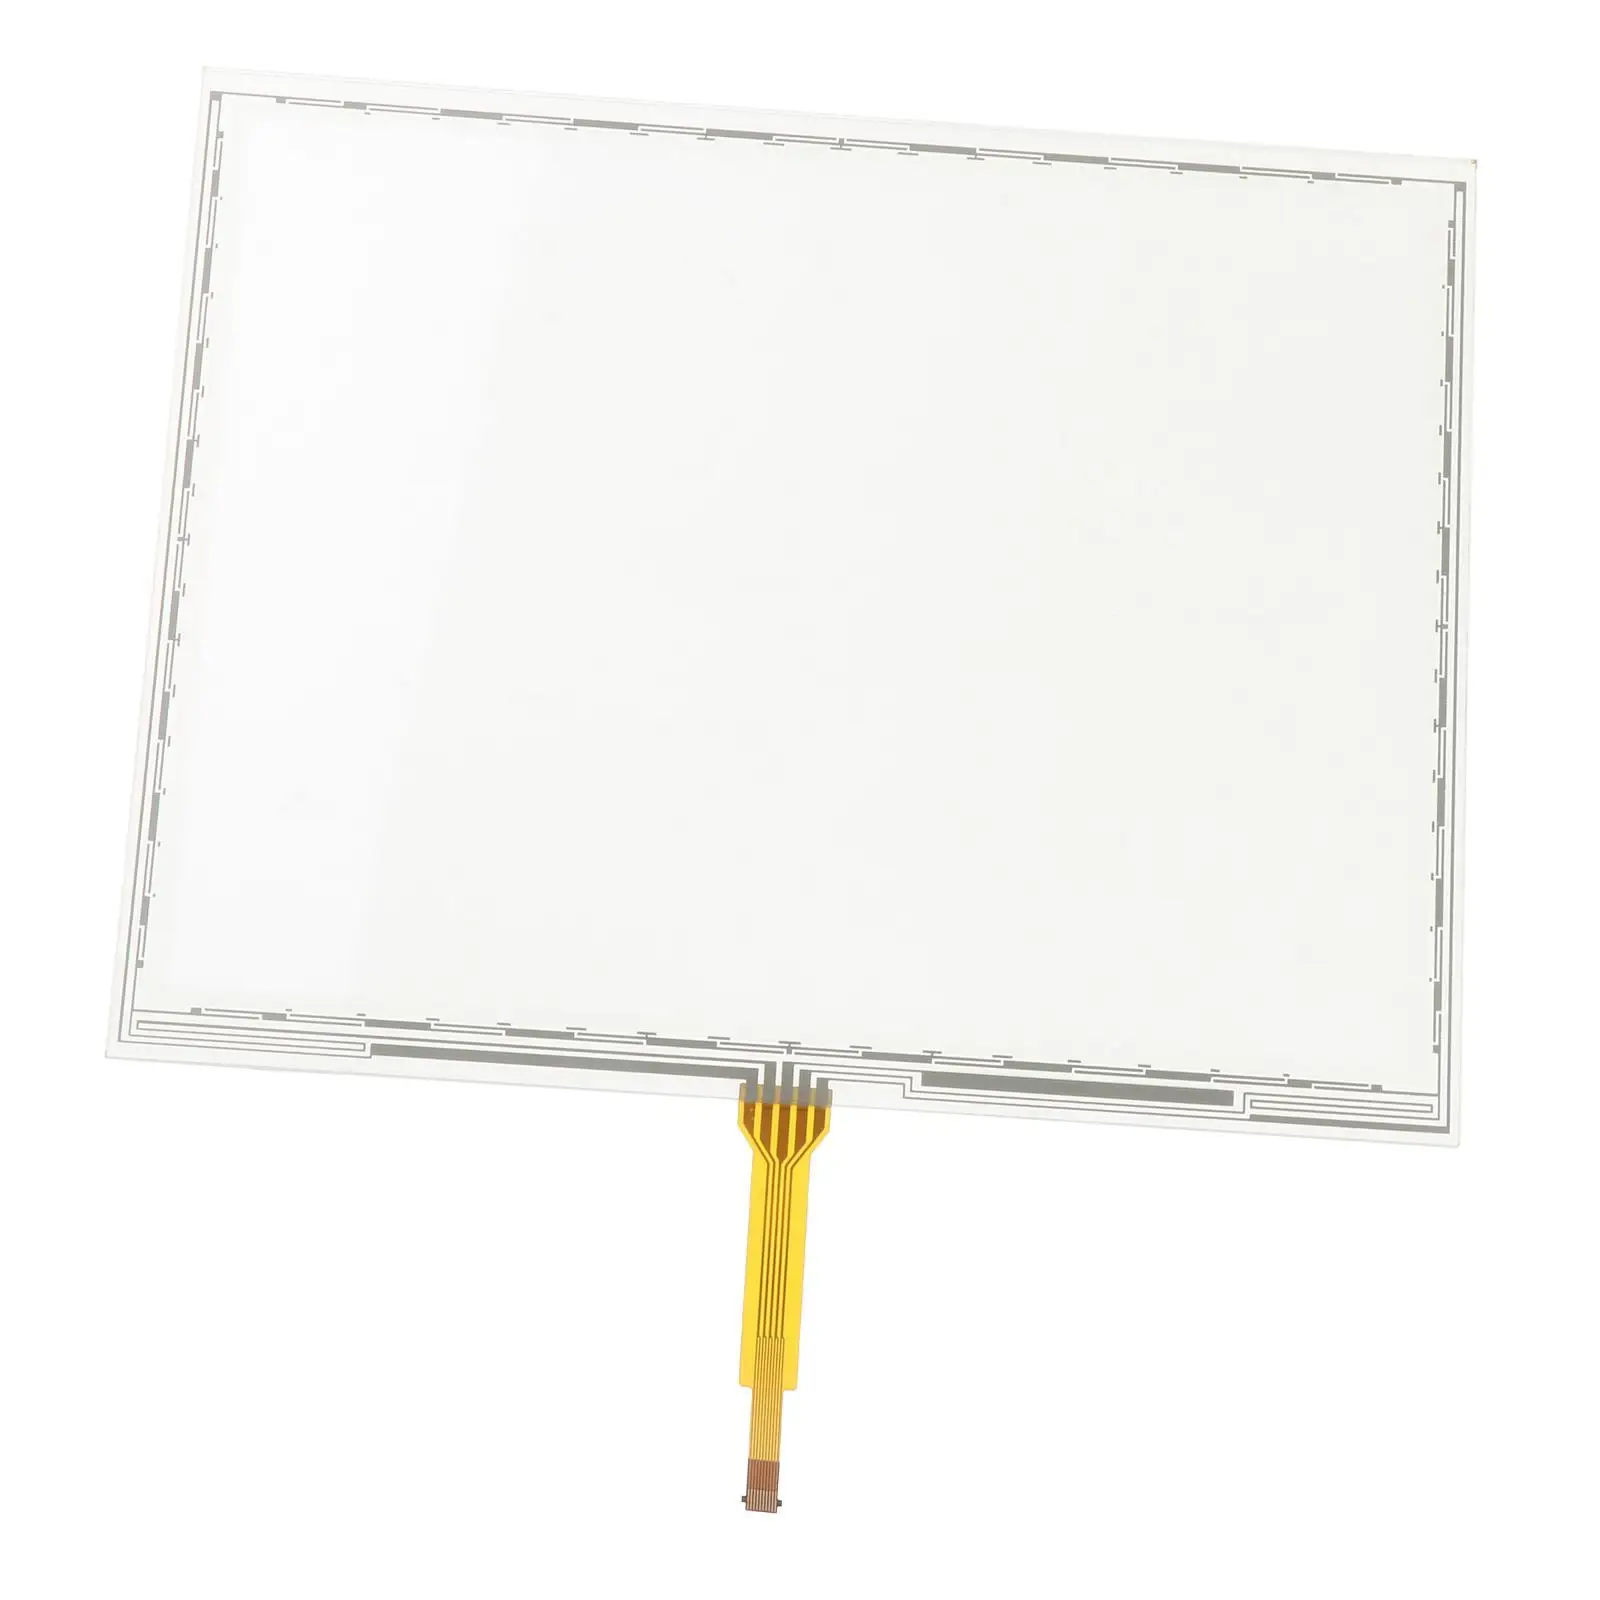 Touch Screen Panel Fpc-863Ne LCD Display Panel 23.1cmx18.2cm for 4640 Repair Parts Reliable Direct Installation